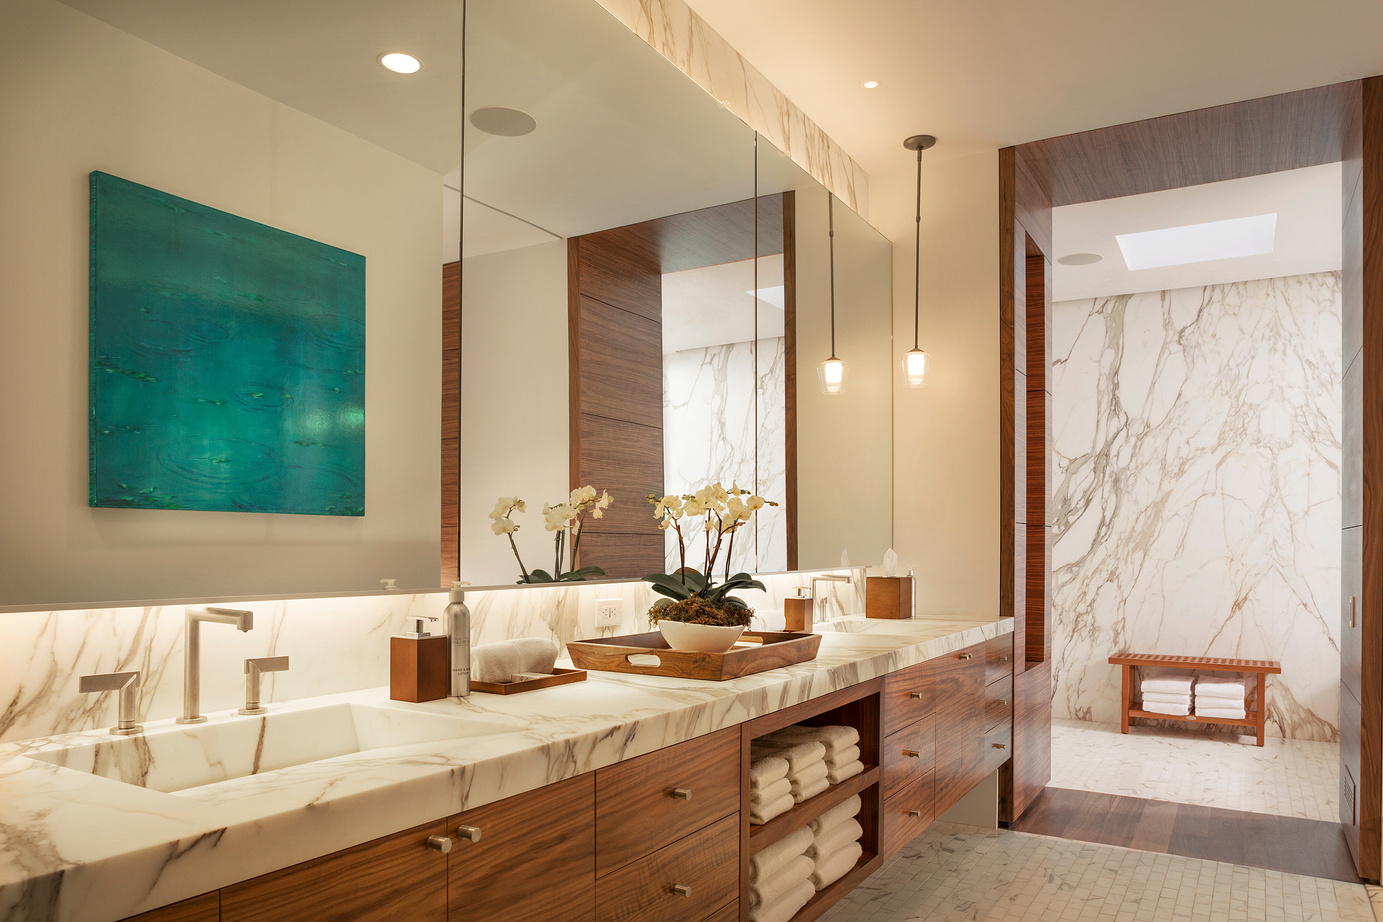 K. Brackett Builds managed the millwork installation for the penthouse suites at Casa Madrona Hotel. The photo of the Master Bathroom is by Jeff Zaruba Photography, which K. Brackett Builds licensed and copyrighted. Safdie Rabines Architects designed